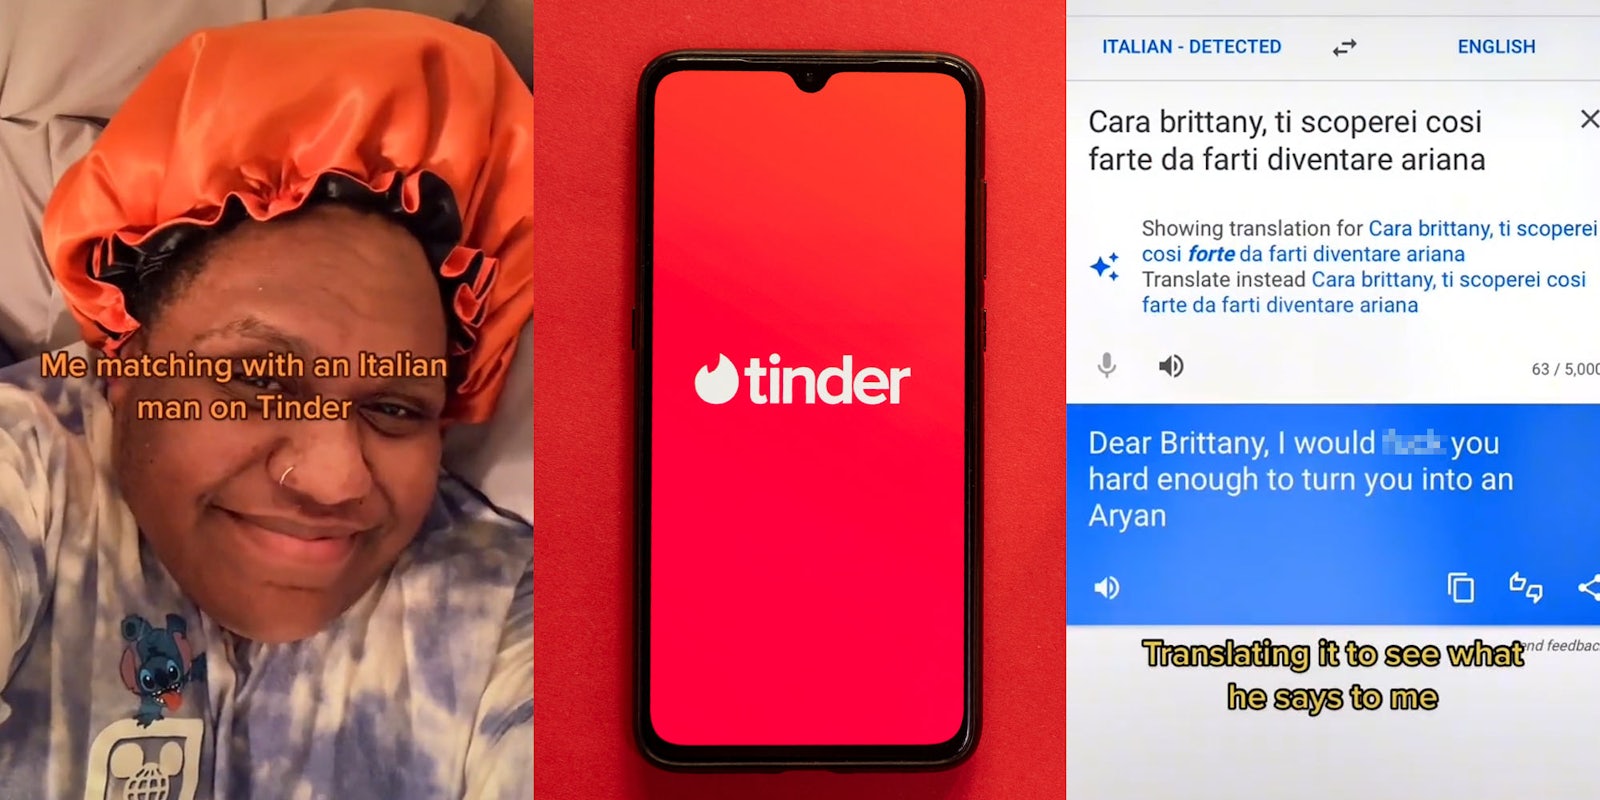 Woman caption ' Me matching with an Italian man on Tinder ' (l) Tinder shutterstock image (c) TikTok greenscreen google translate search screenshot caption ' Translating it to see what he says to me ' (r)